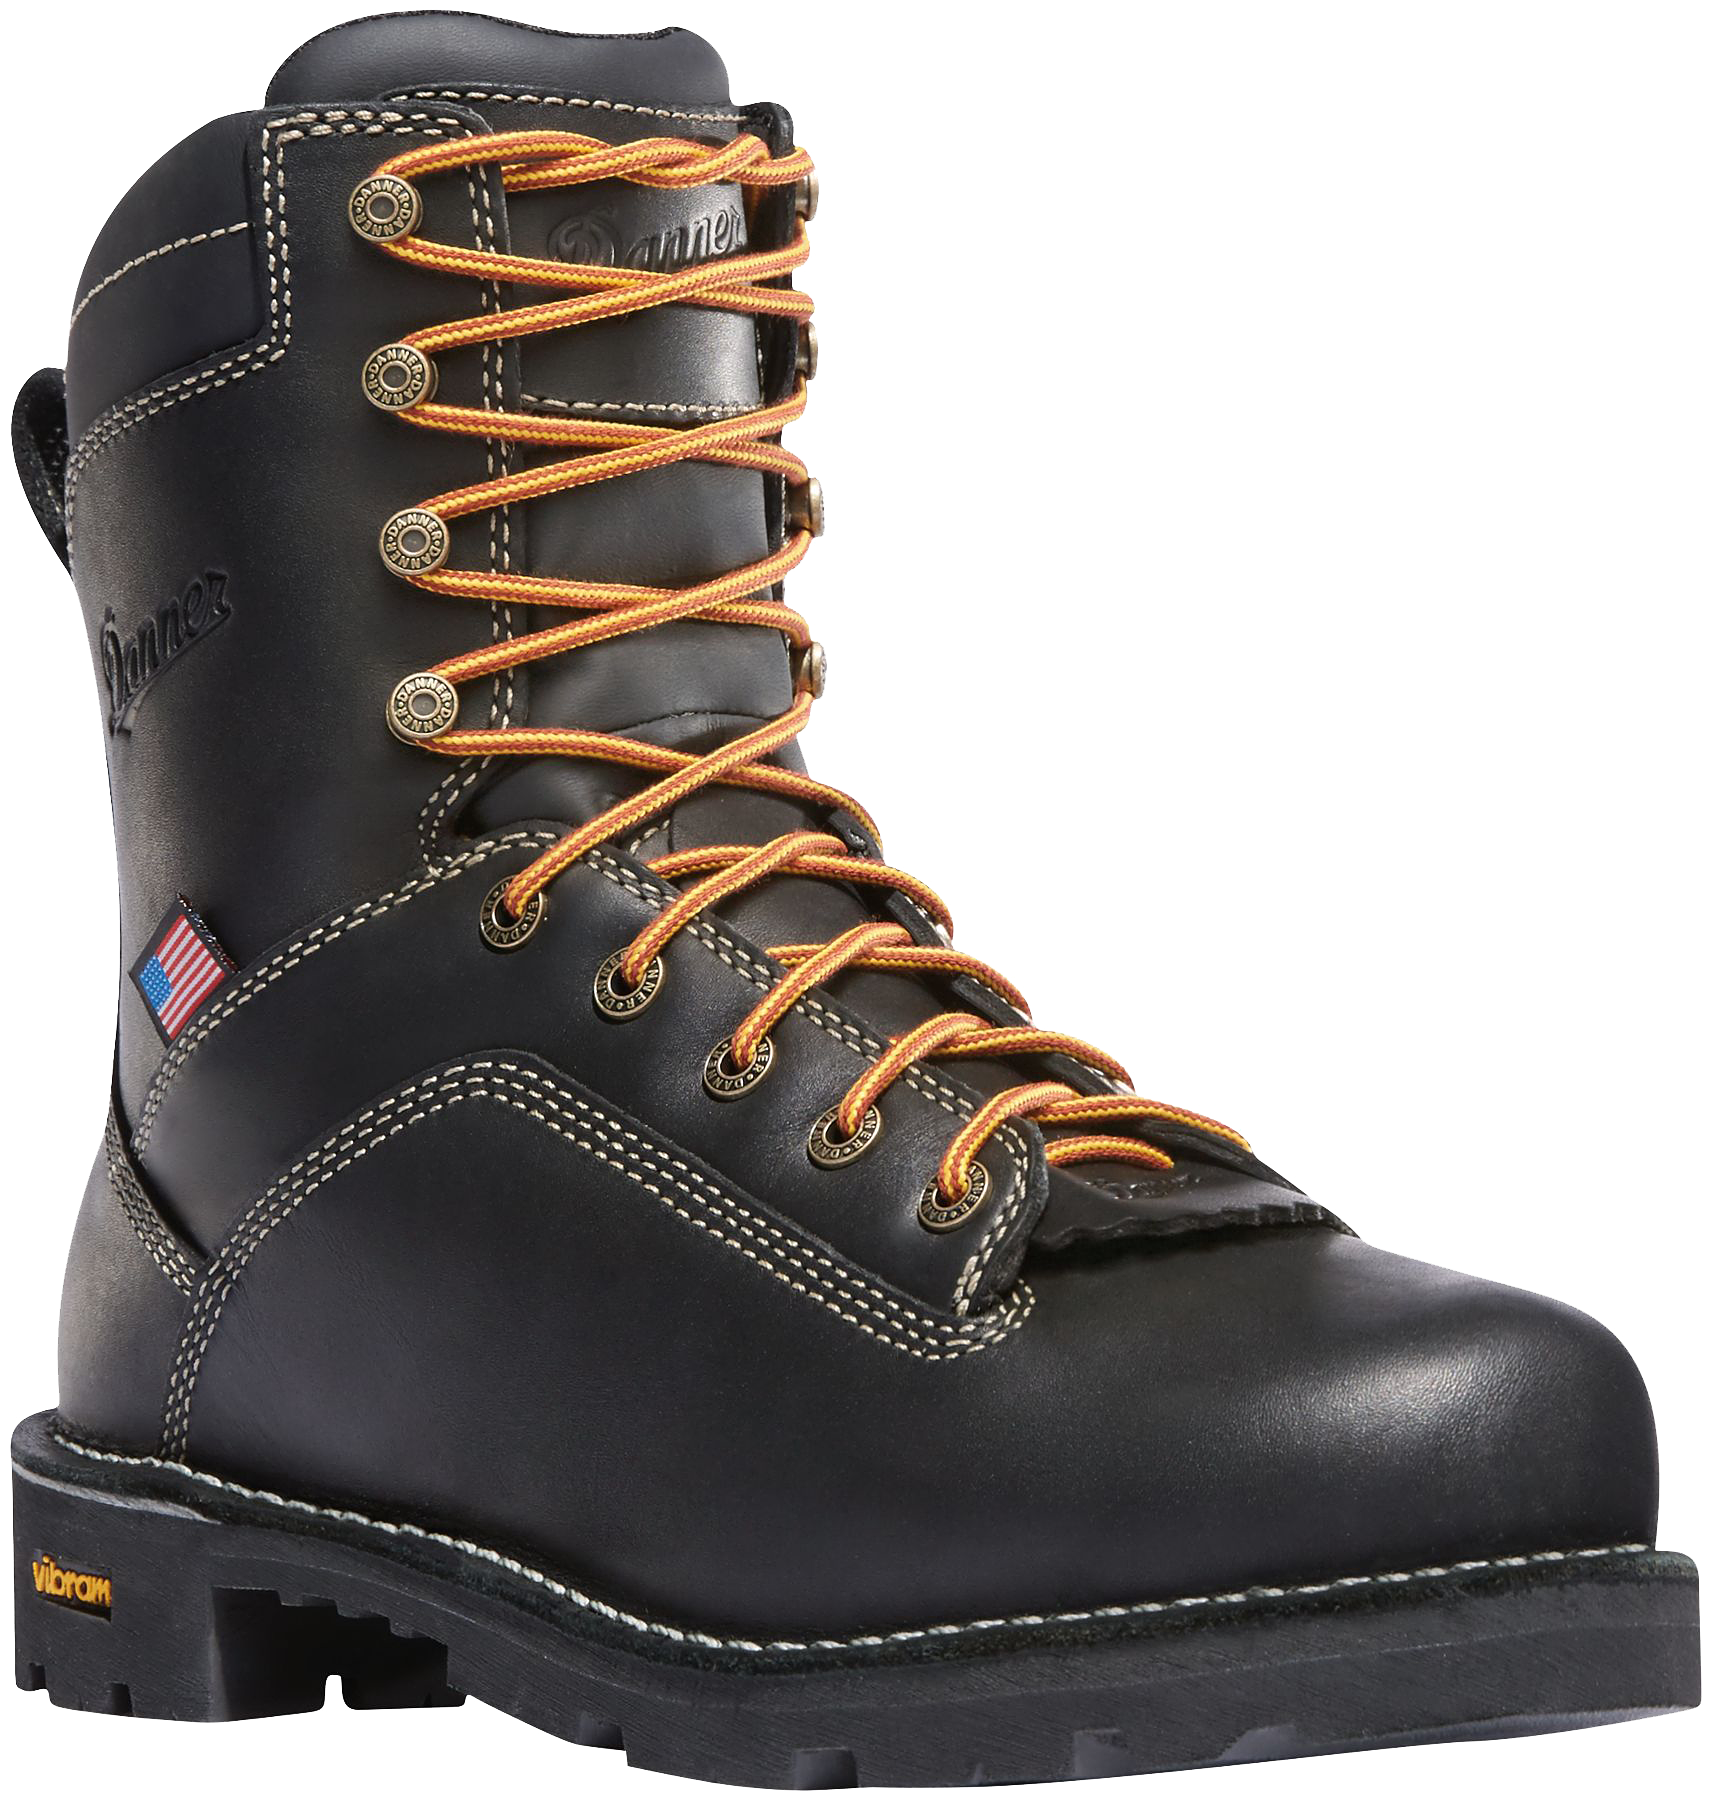 Danner Quarry USA Brown GORE-TEX Alloy Toe Work Boots for Men - Black - 14W